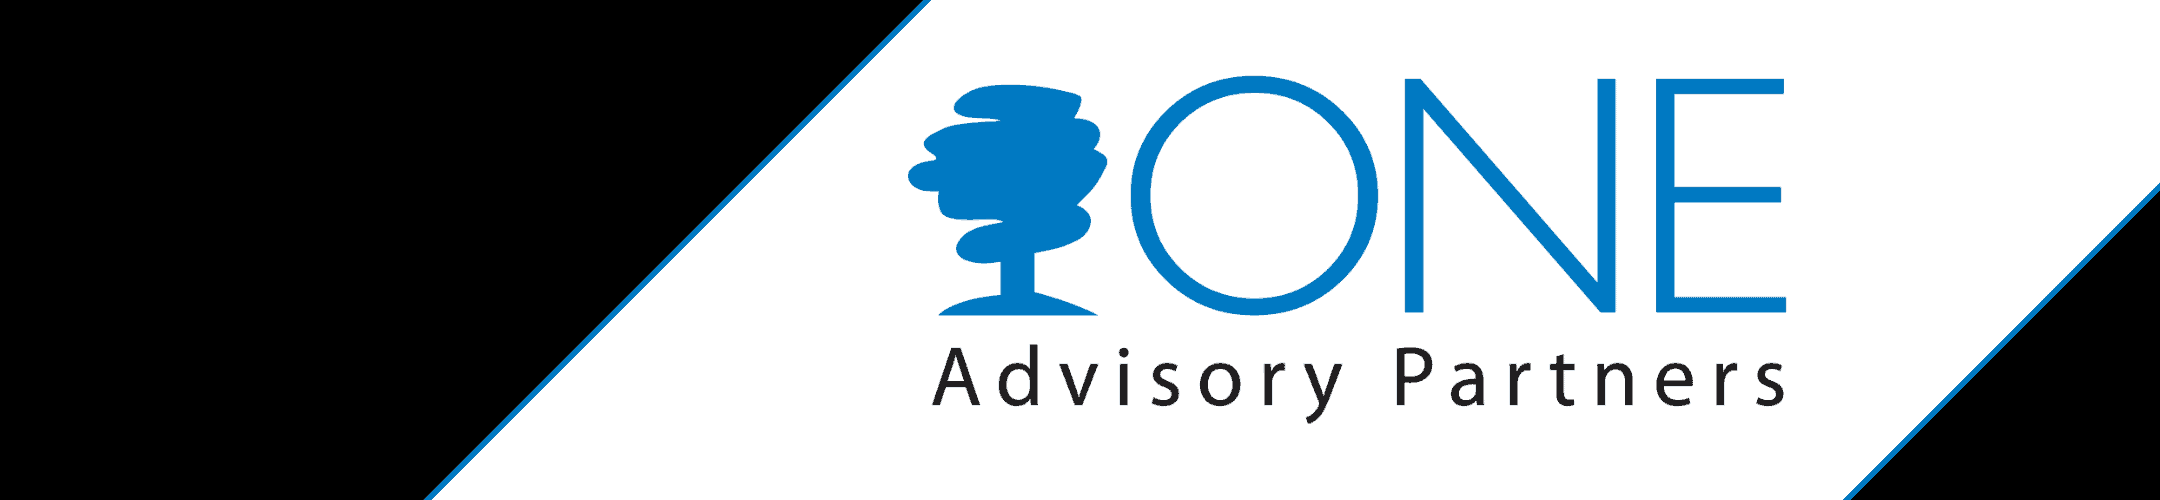 One advisory partners logo featuring a stylized representation of a human profile situated between the word 'one' and the descriptive tagline, set against a contrasting black and white background.